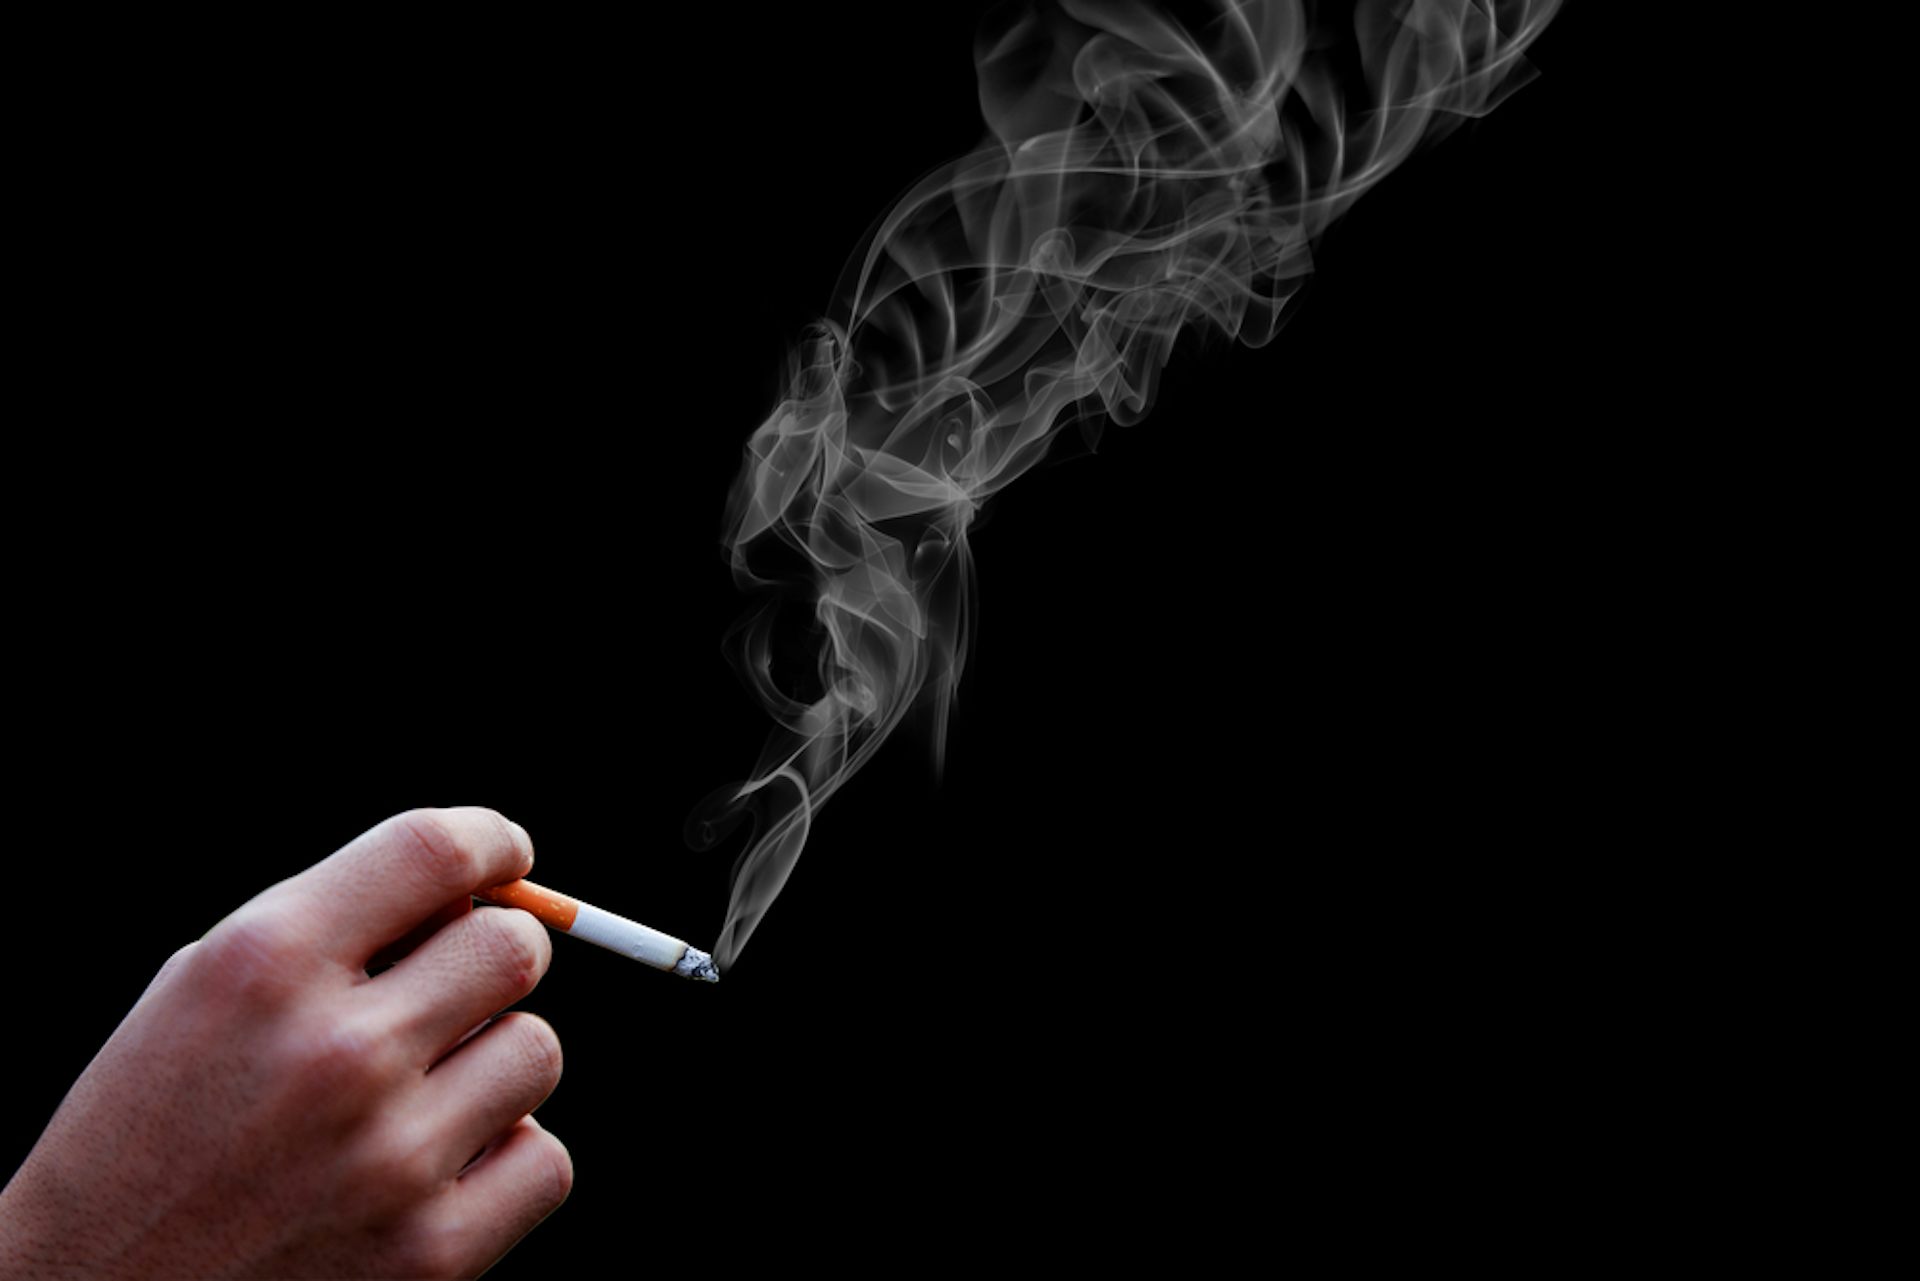 Smoking may protect against Parkinson's ...